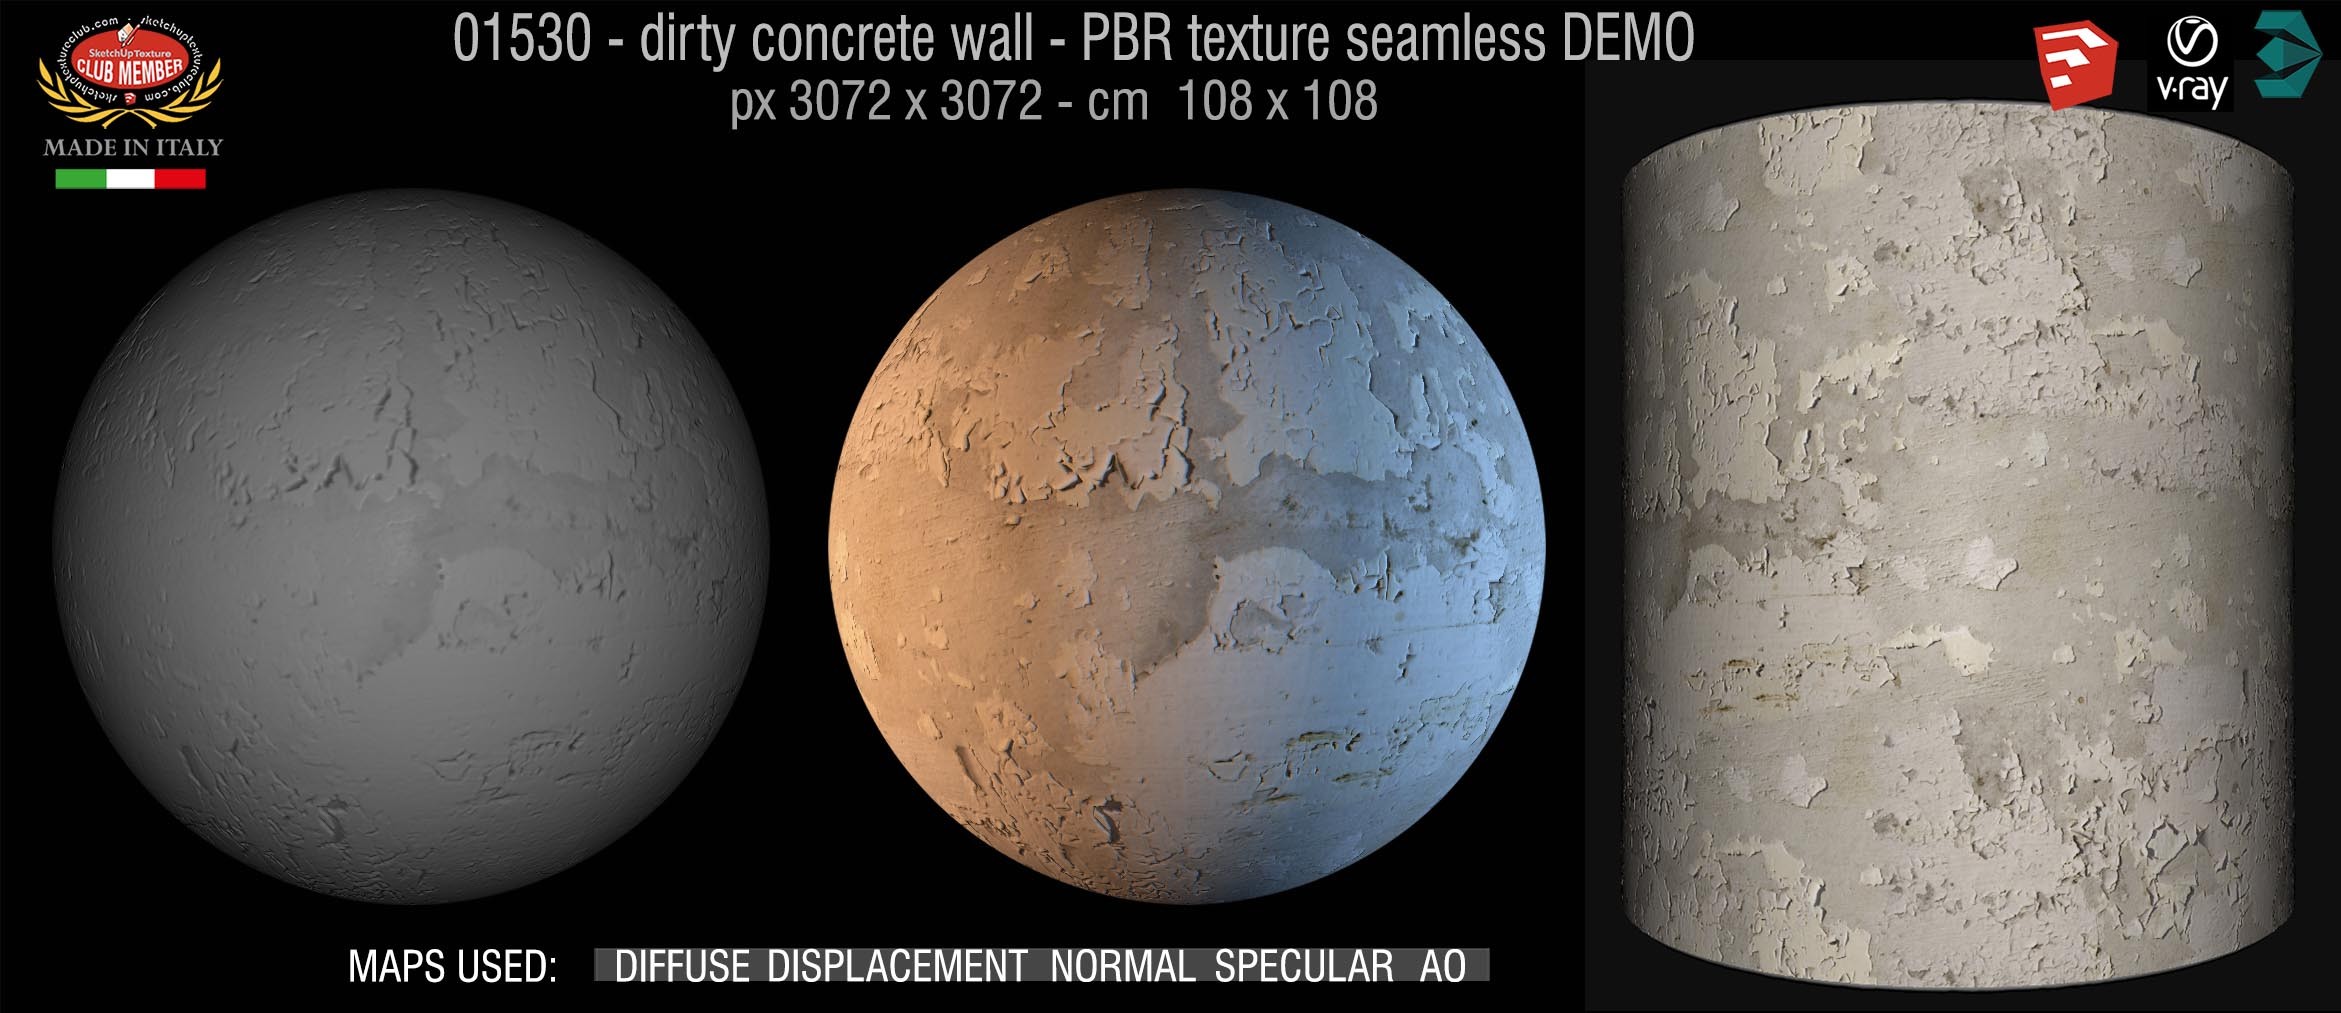 01530 Concrete bare dirty wall PBR texture seamless DEMO